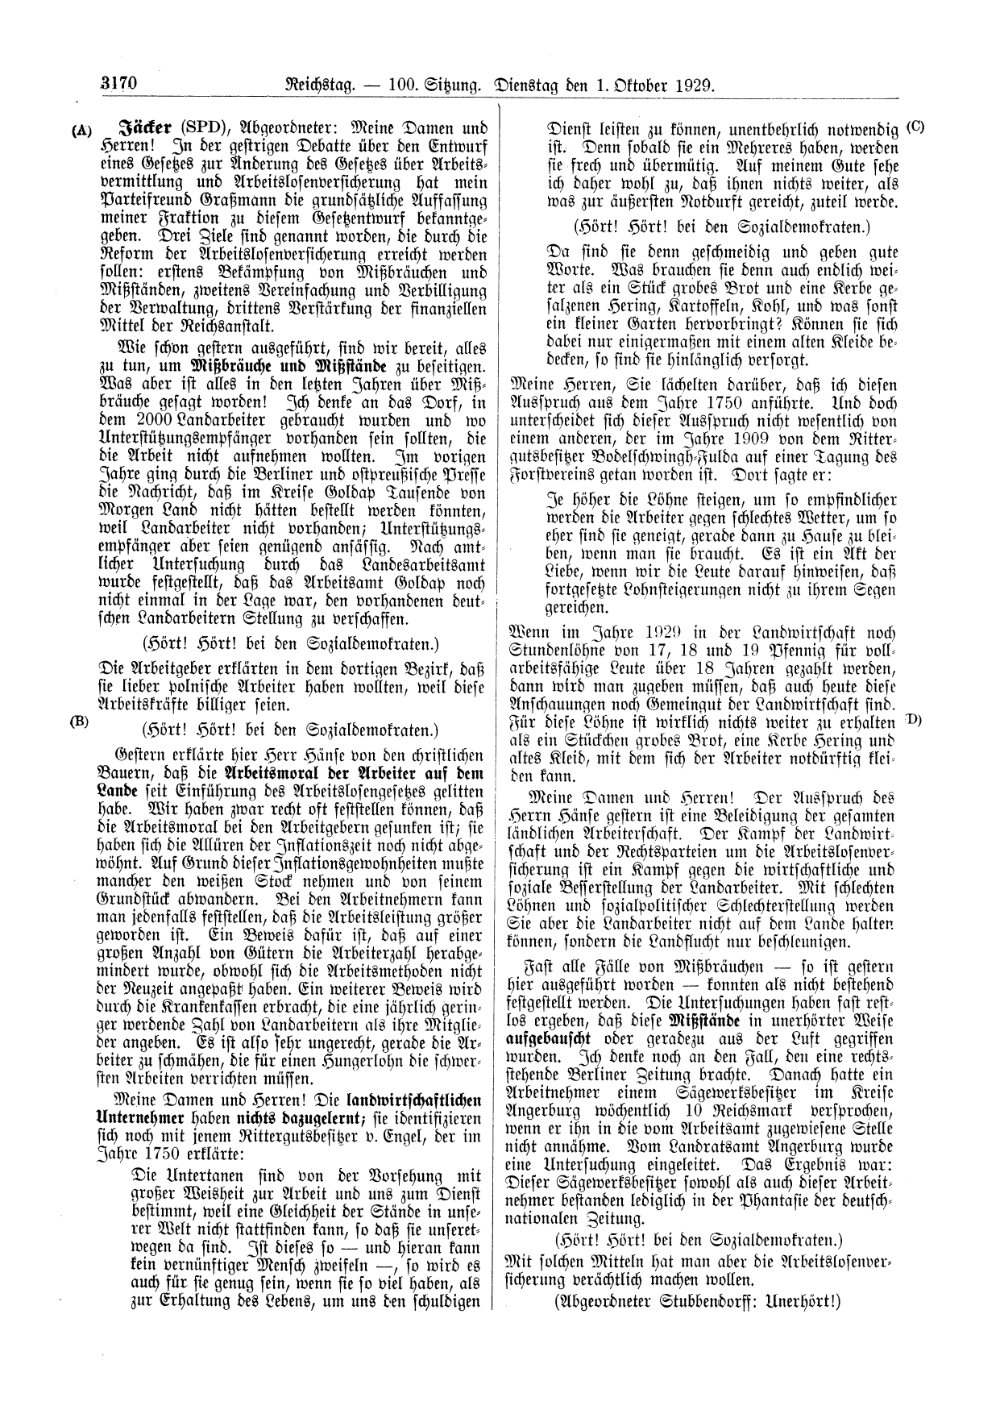 Scan of page 3170